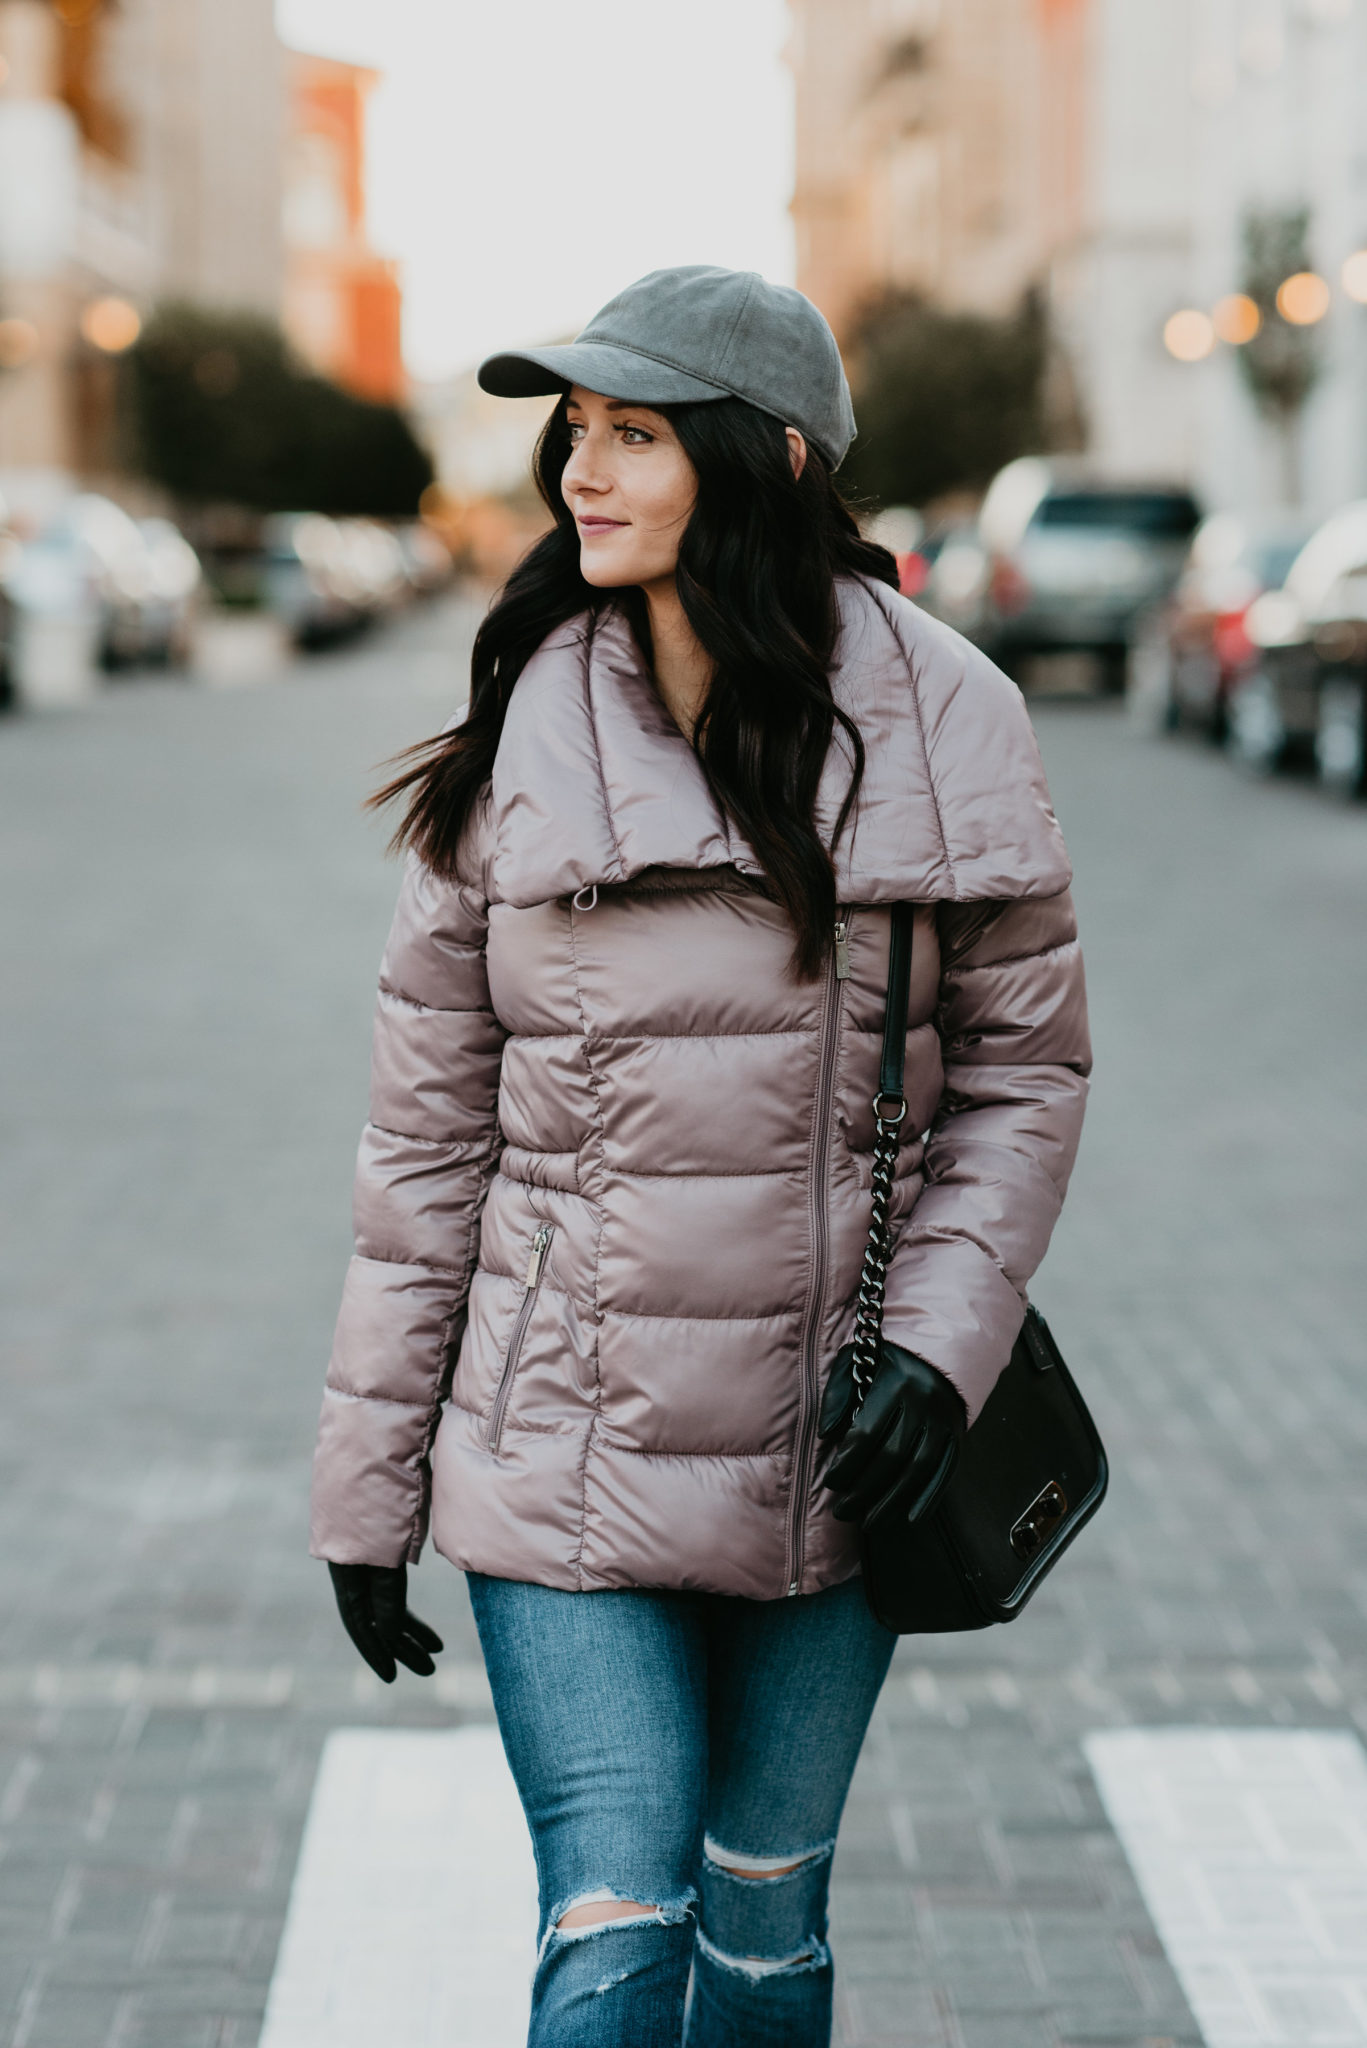 dusty rose puffer jacket outfit with baseball cap - Puffer Jacket Outfit styled by popular Las Vegas fashion blogger, Outfits & Outings